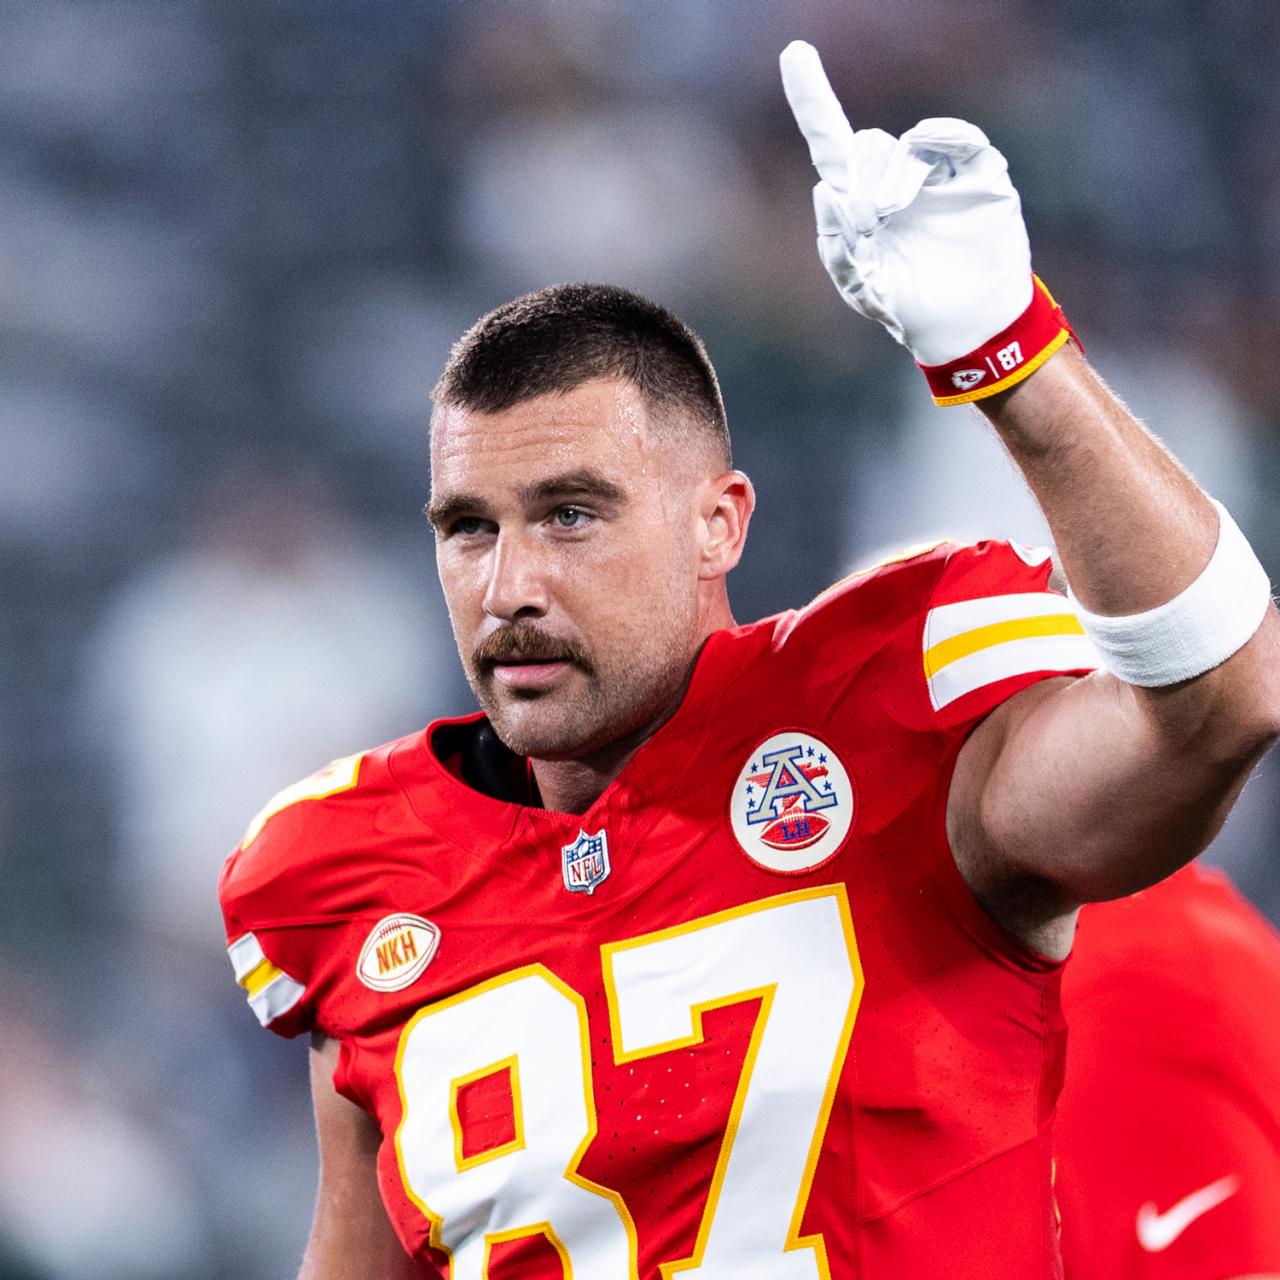 Travis Kelce, Kansas City Chiefs tight end and host of Kelce Jam